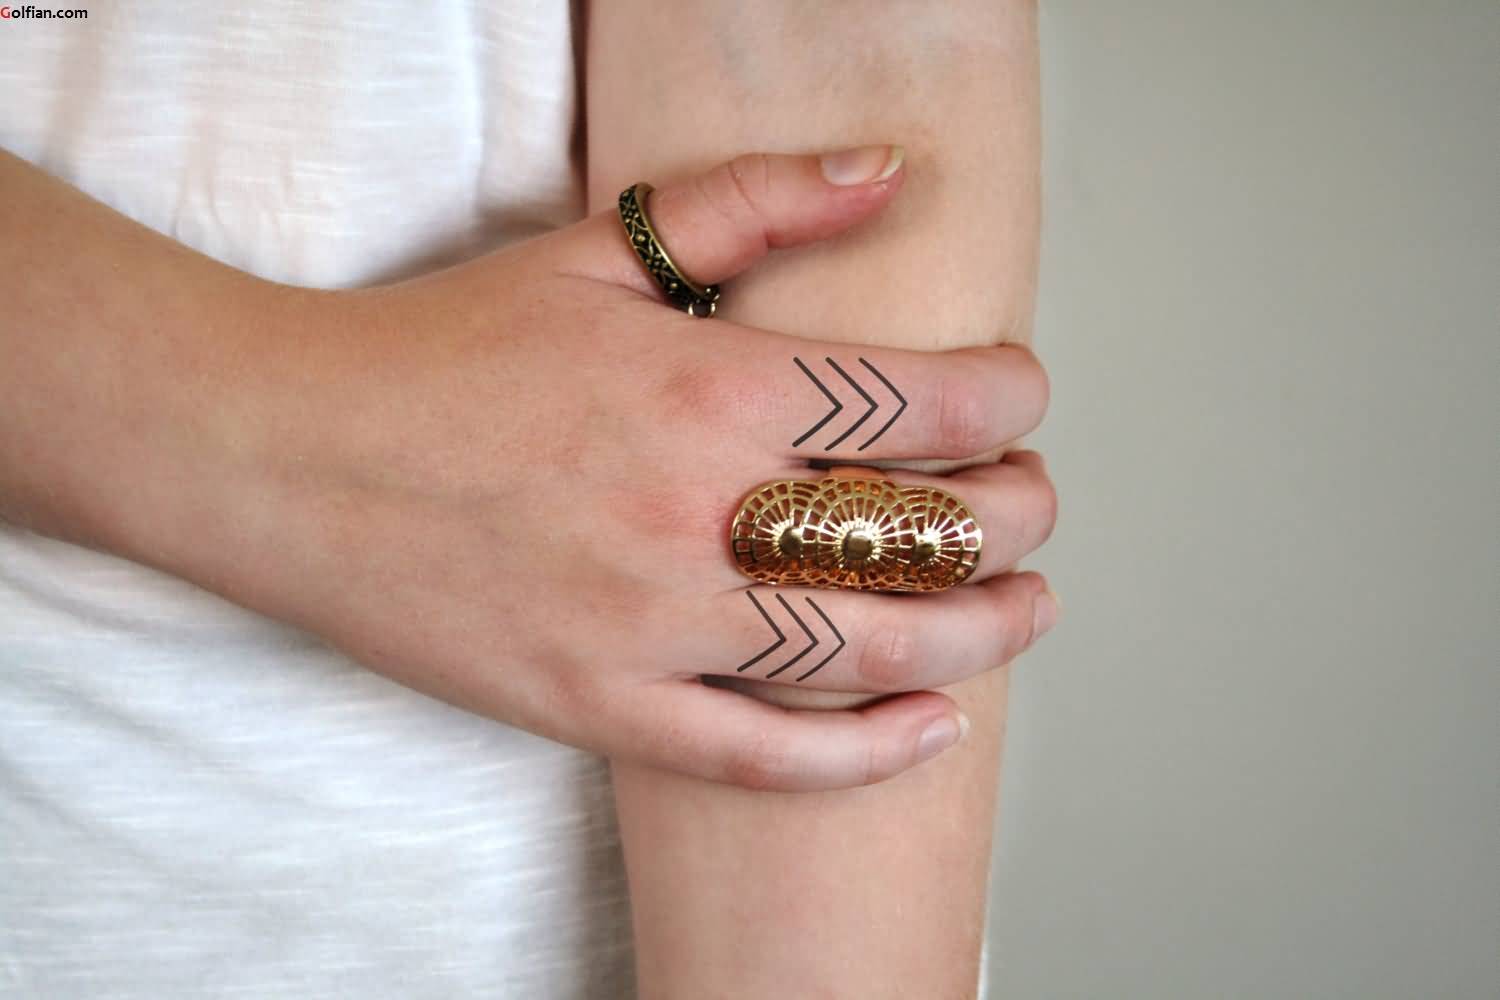 Fabulously Designed Chevron Arrows Tattoos On Two Fingers